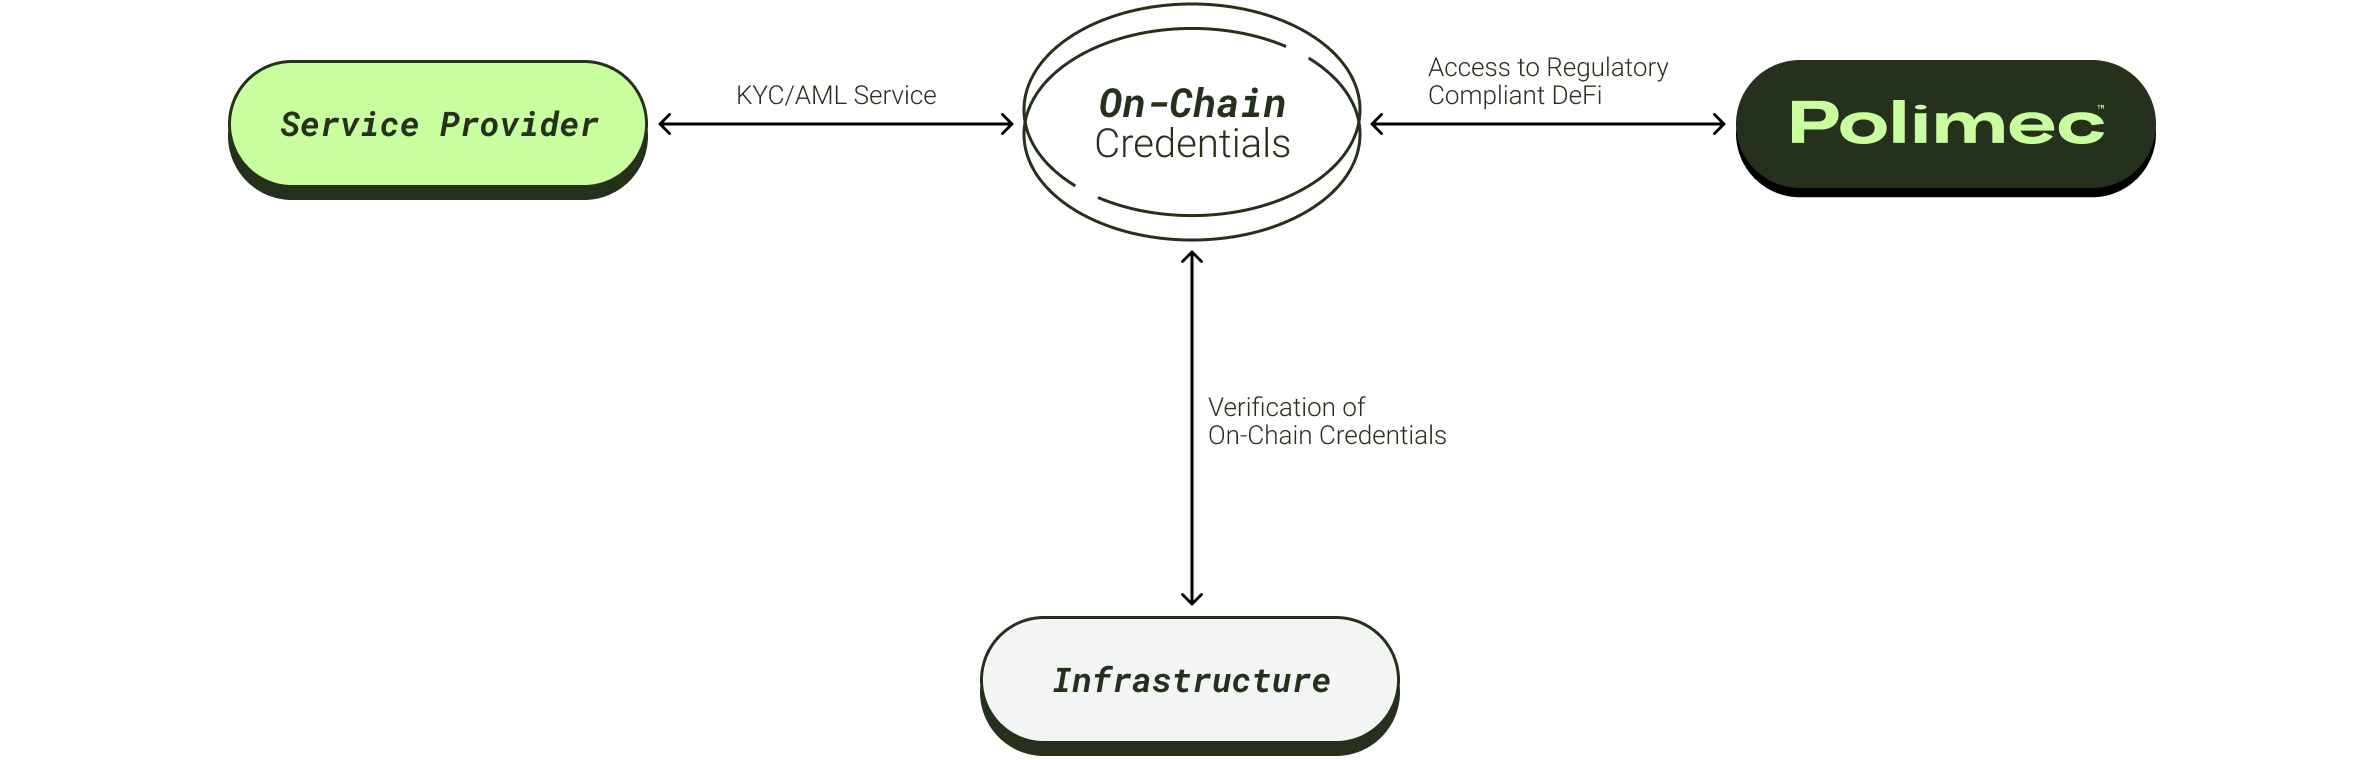 Components enabling Polimec’s on-chain credentials